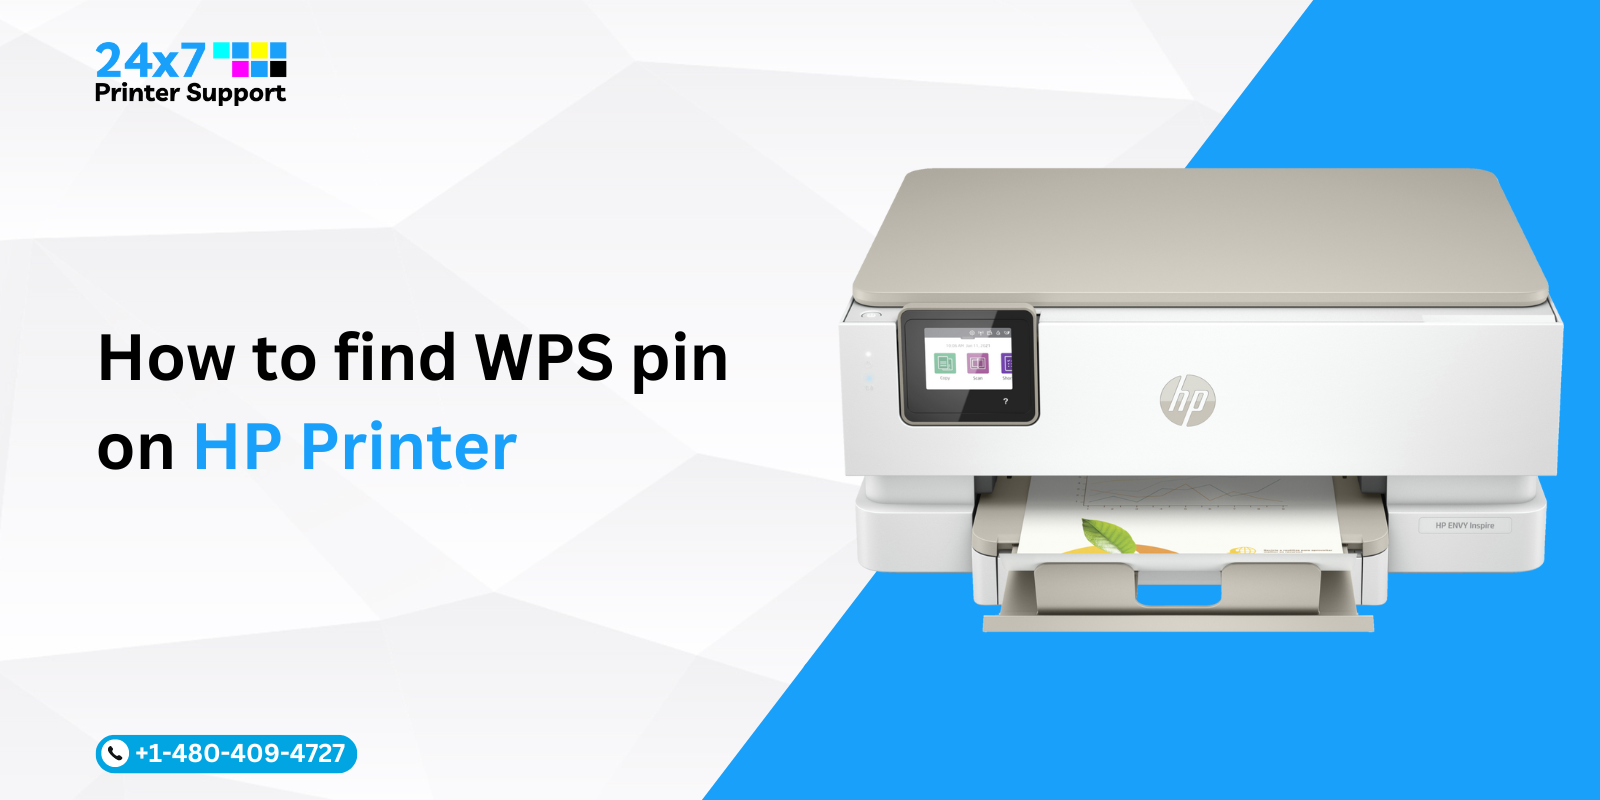 How To Find Wps Pin On HP Printer